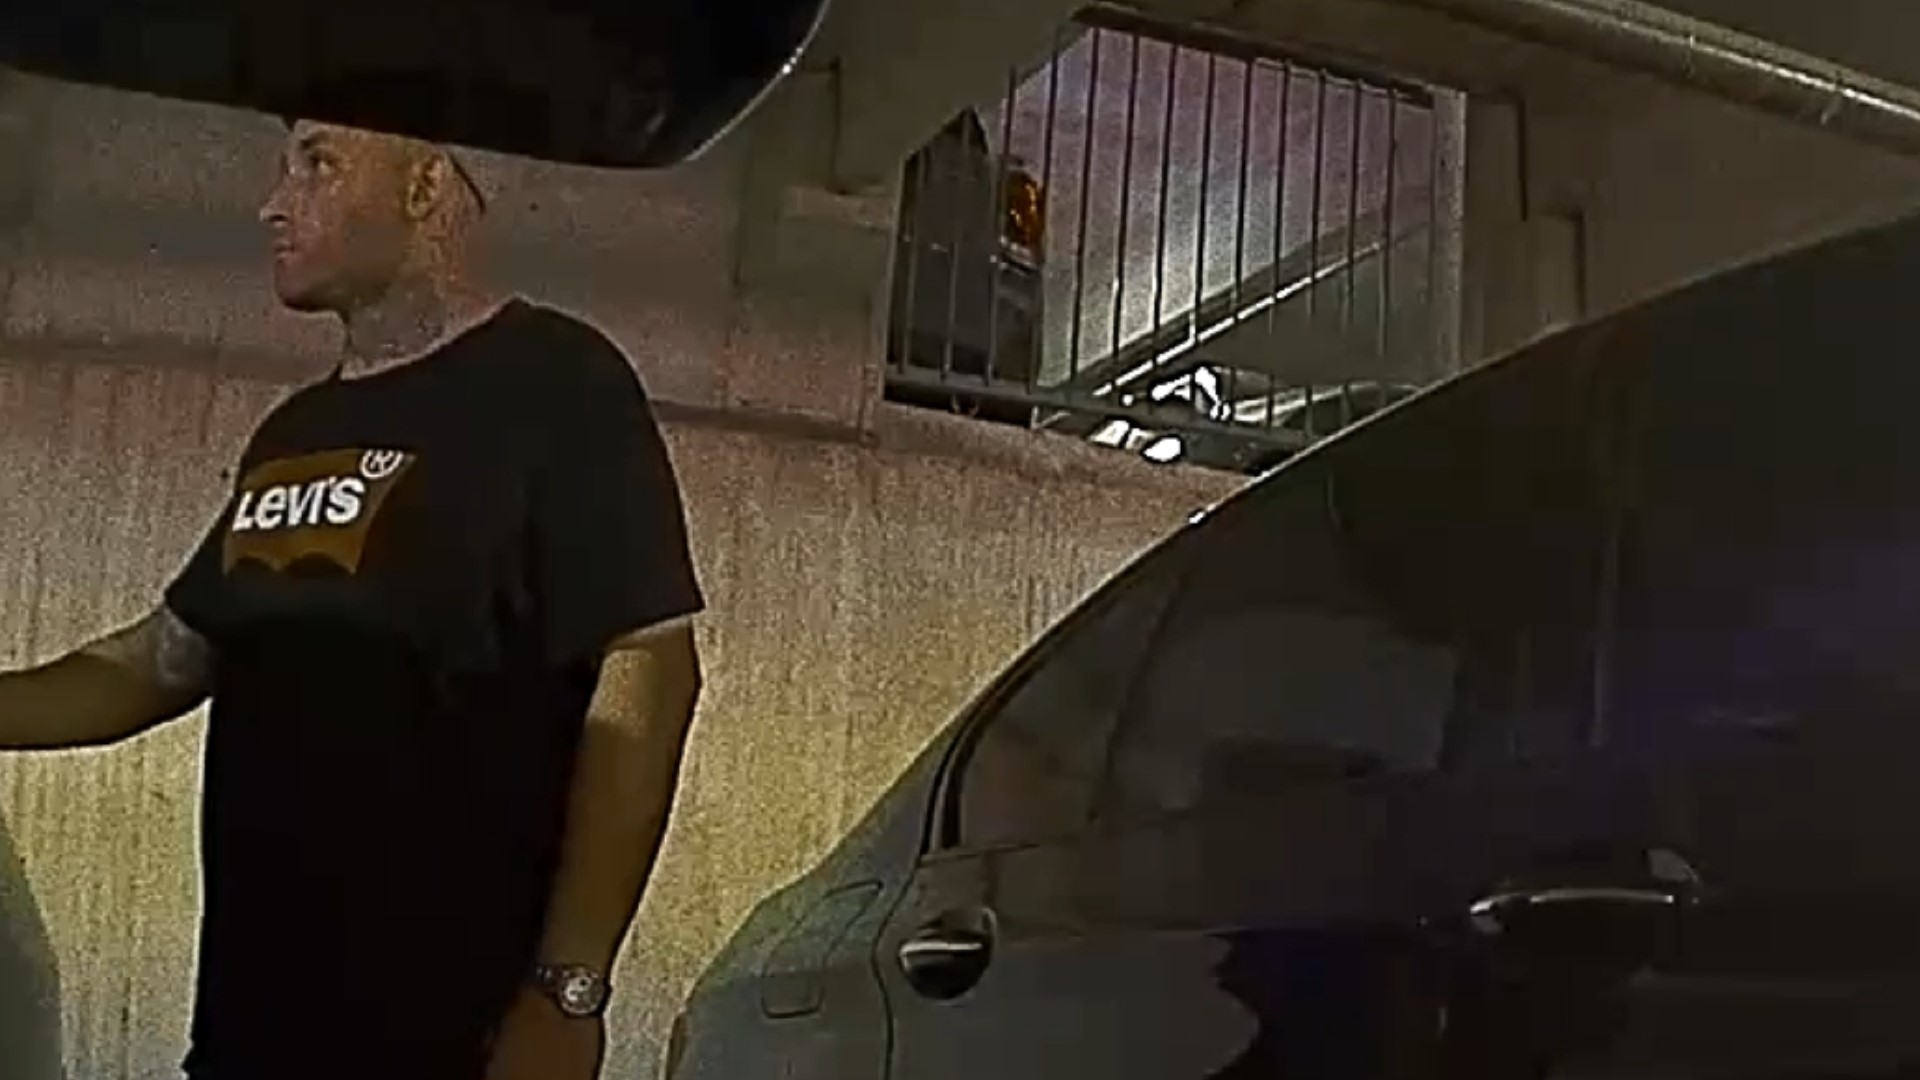 Do you recognize this person? The suspect can be seen breaking into Jen Lee's vehicle parked at the RIM shopping center.